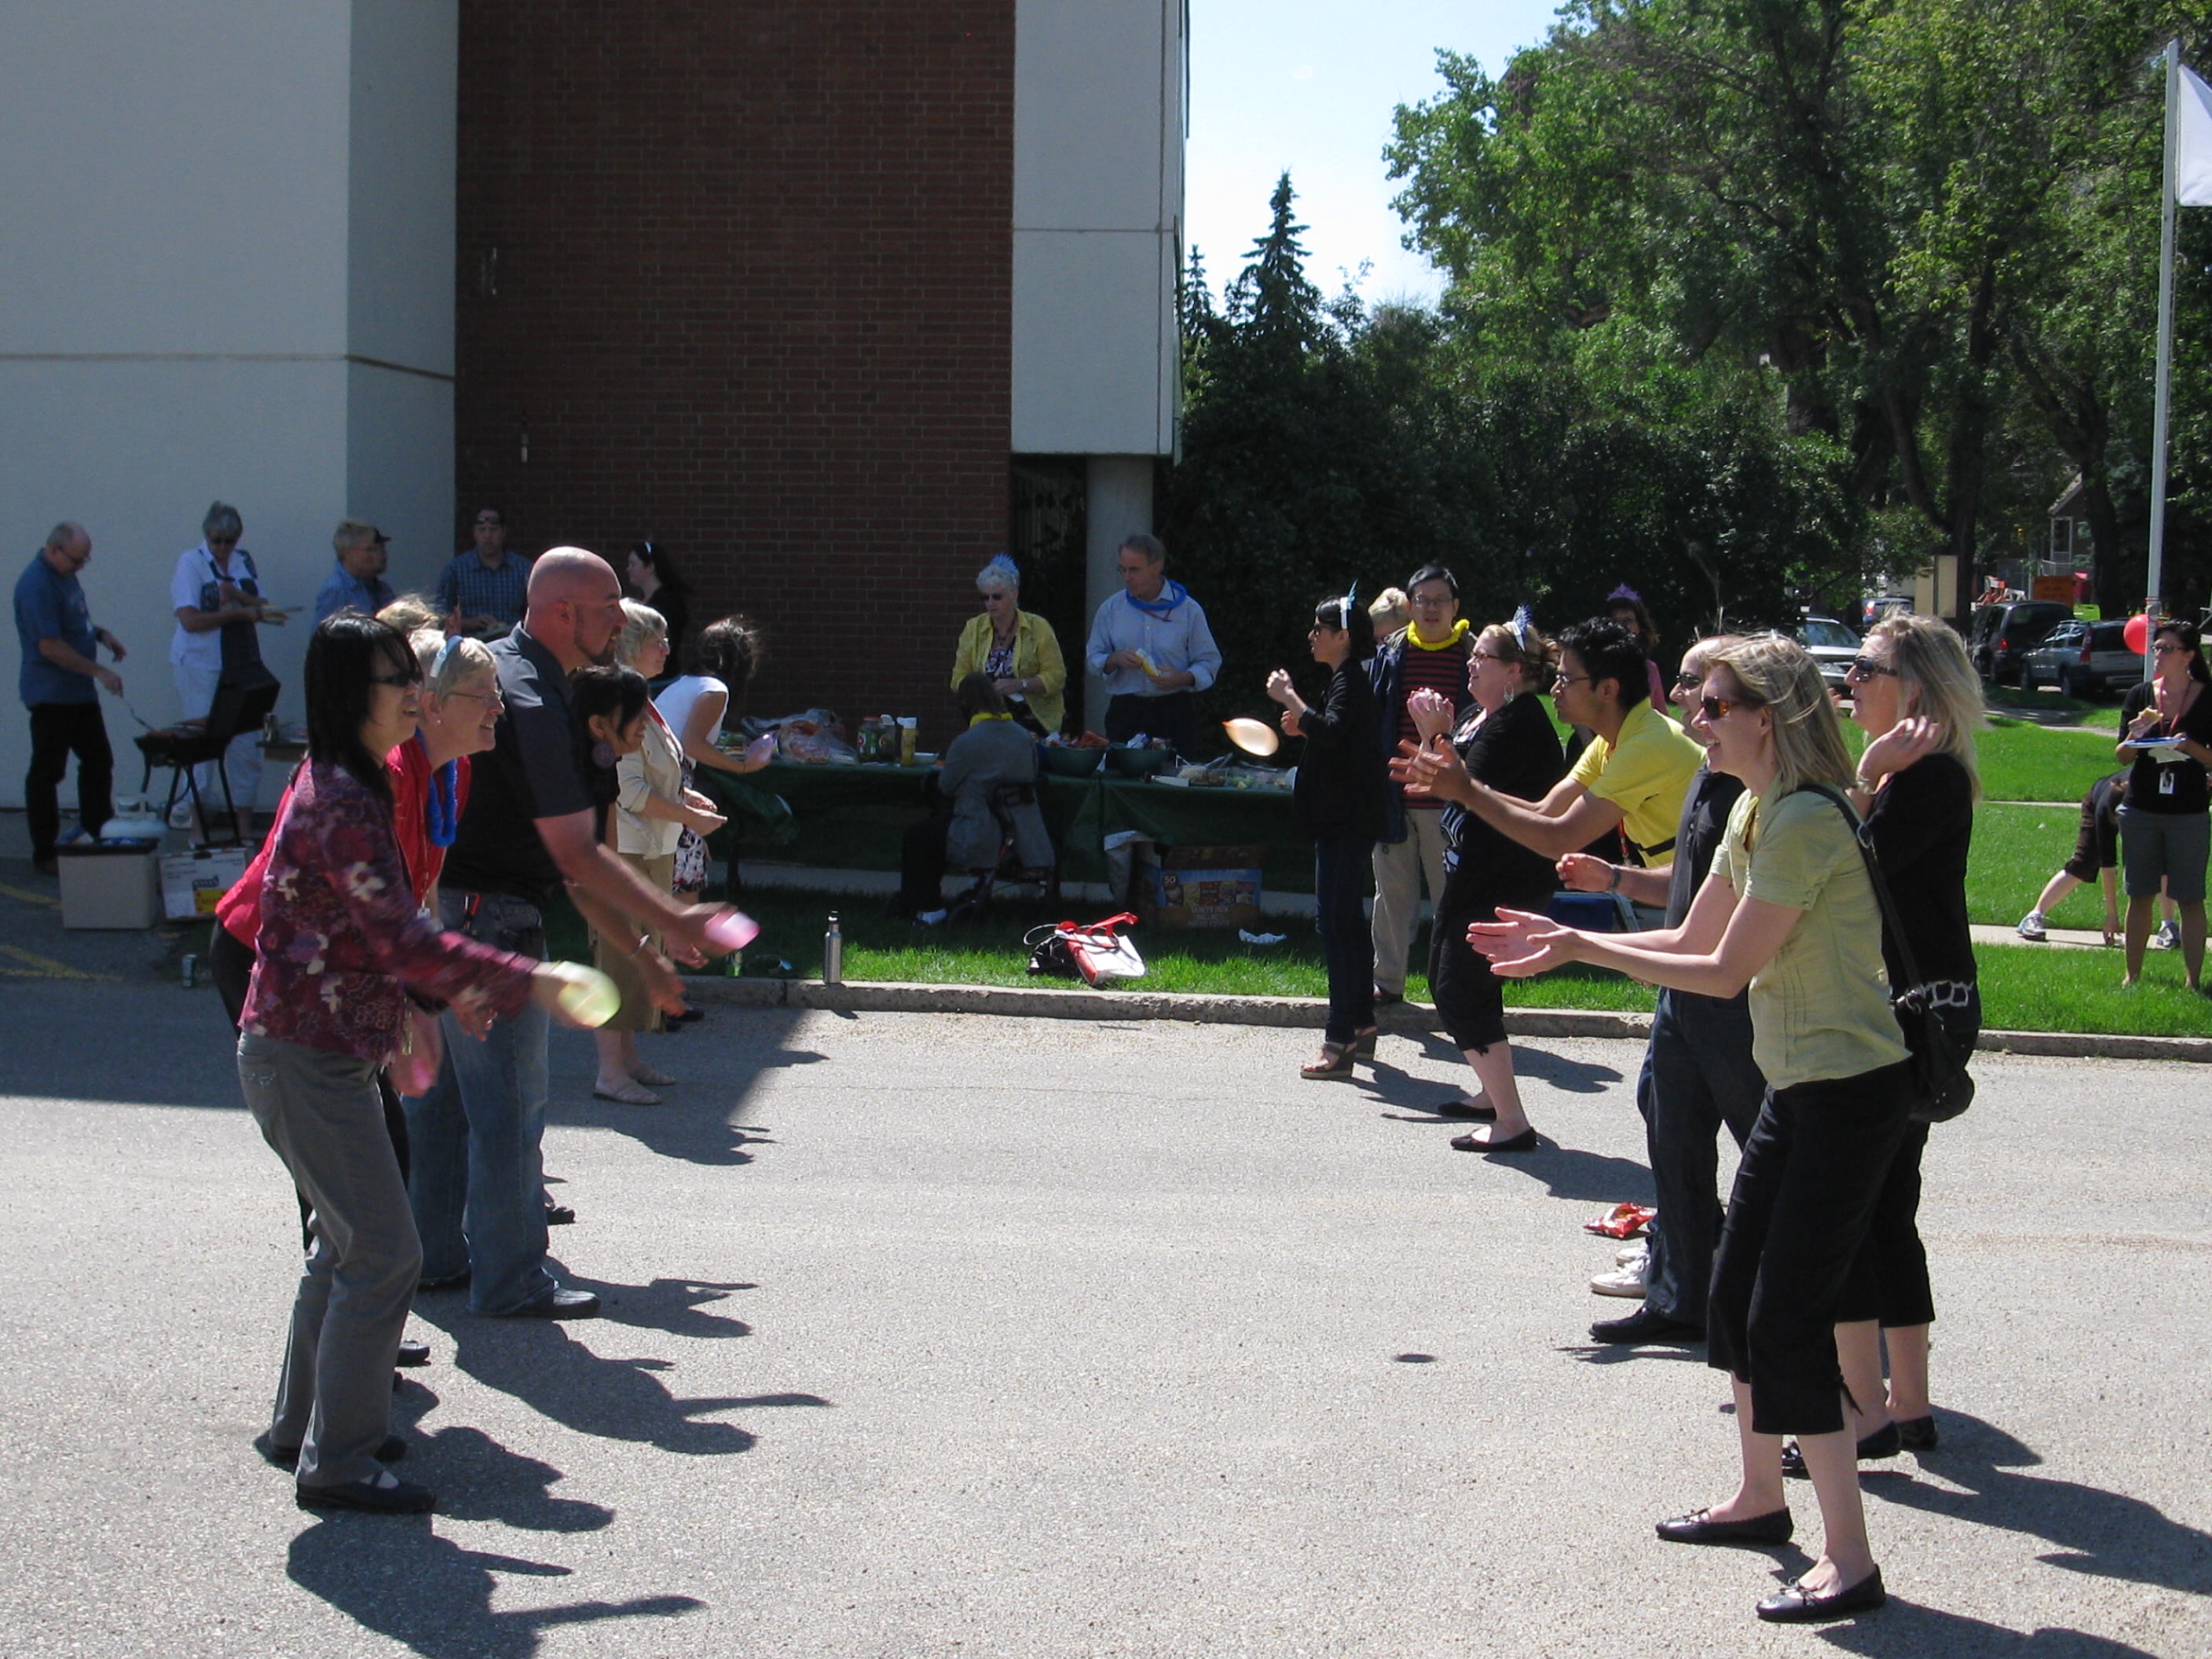 Competitors try to stay dry (mostly to no avail) for the water balloon toss, one of many fun-filled activities on hand at the appreciation BBQ held in Edmonton.